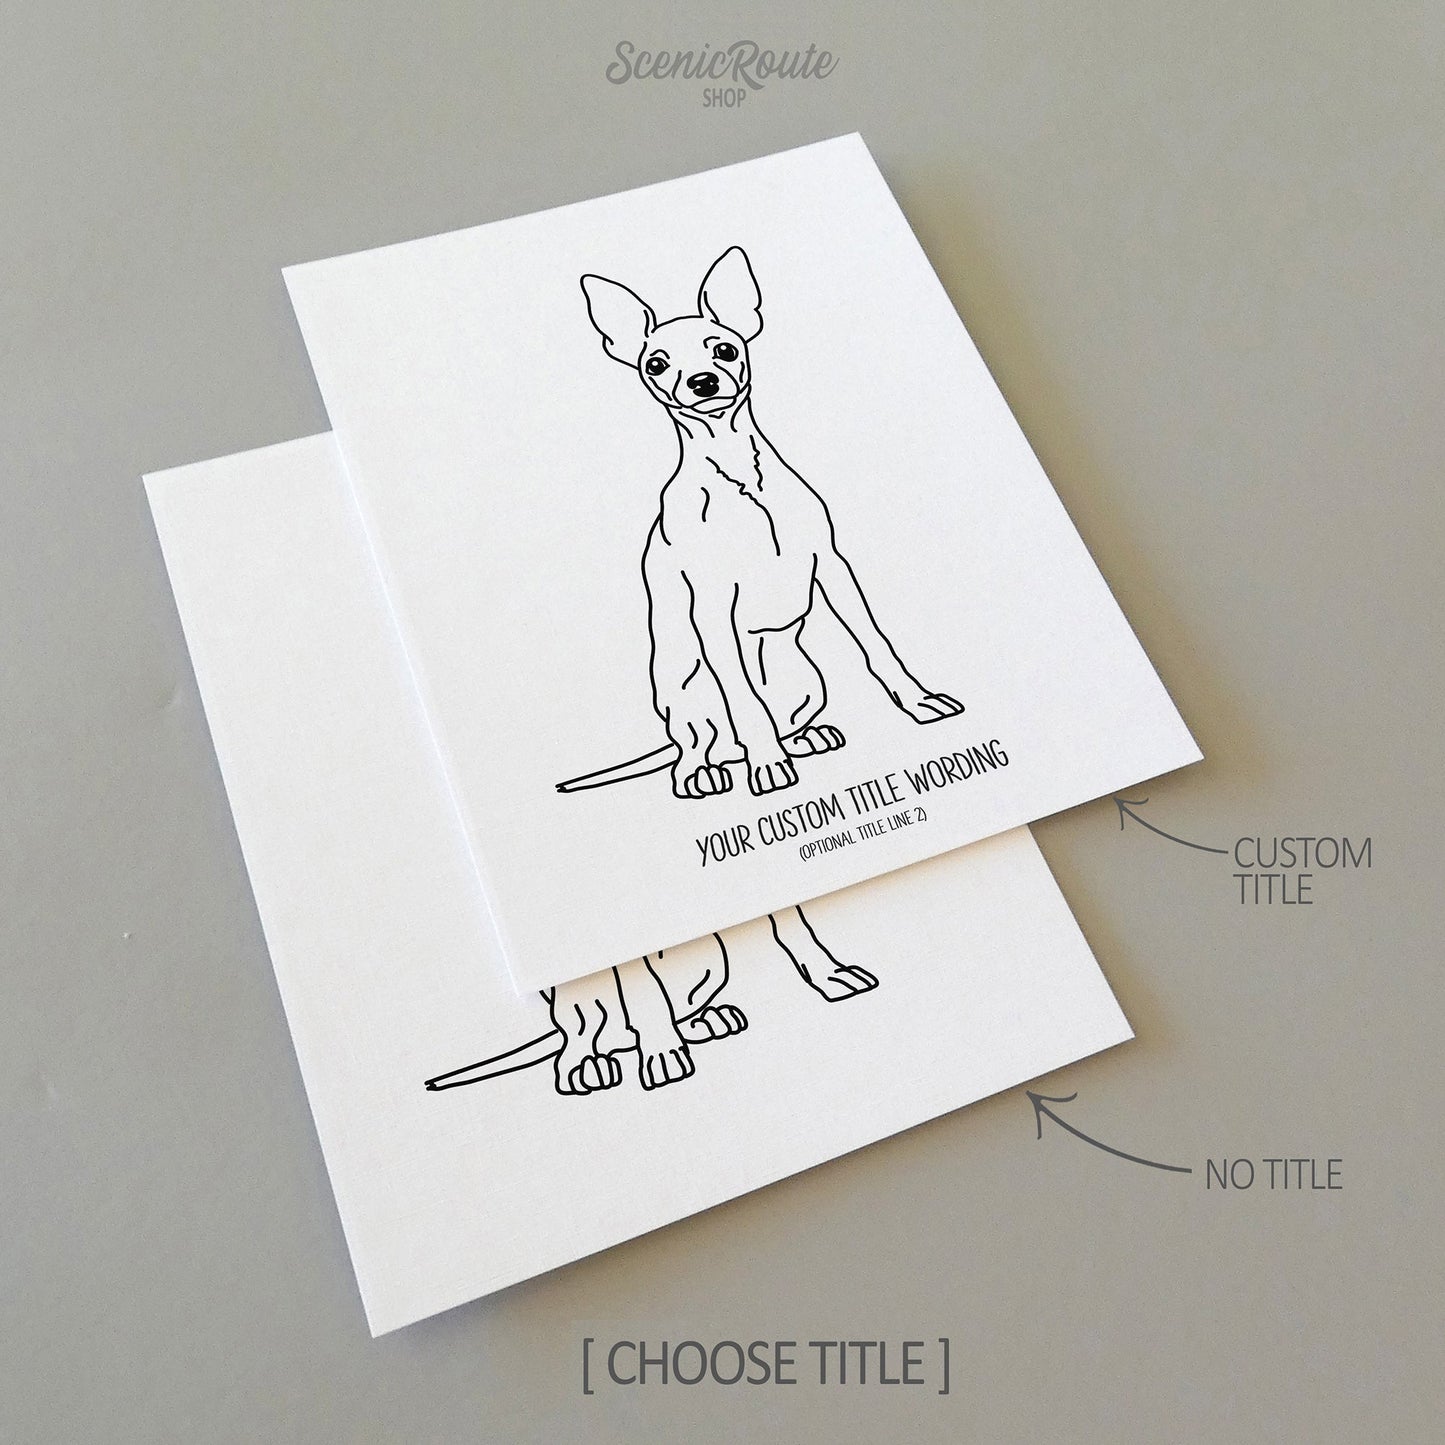 Two line art drawings of a Miniature Pinscher dog on white linen paper with a gray background.  The pieces are shown with “No Title” and “Custom Title” options for the available art print options.